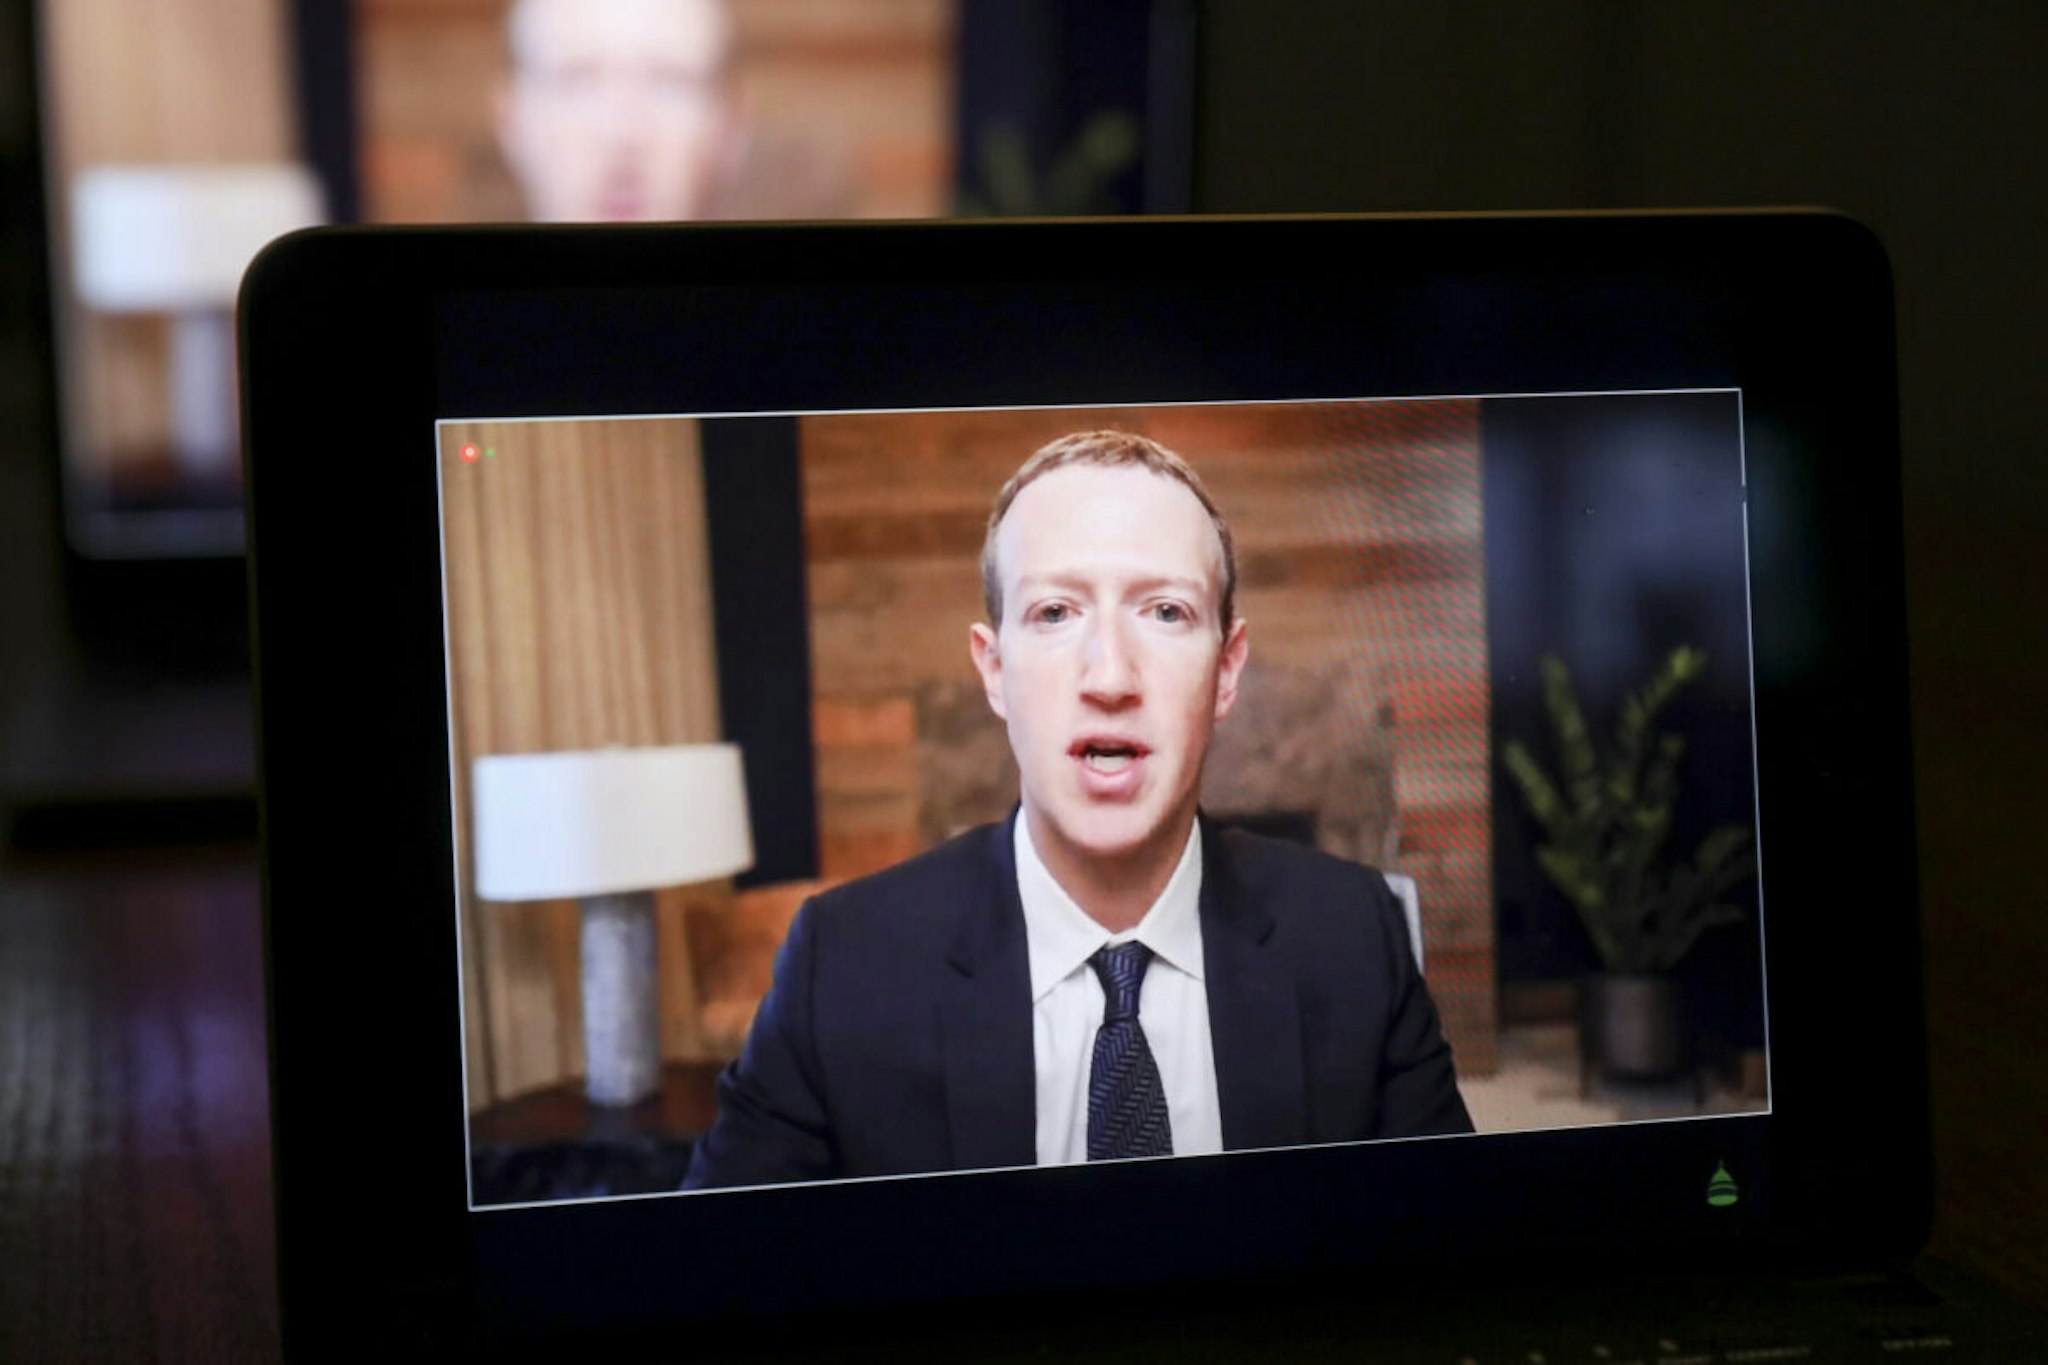 Meta CEO Mark Zuckerberg speaks virtually during a House Energy and Commerce Subcommittees hearing on a laptop computer in Tiskilwa, Illinois, U.S., on Thursday, March 25, 2021.